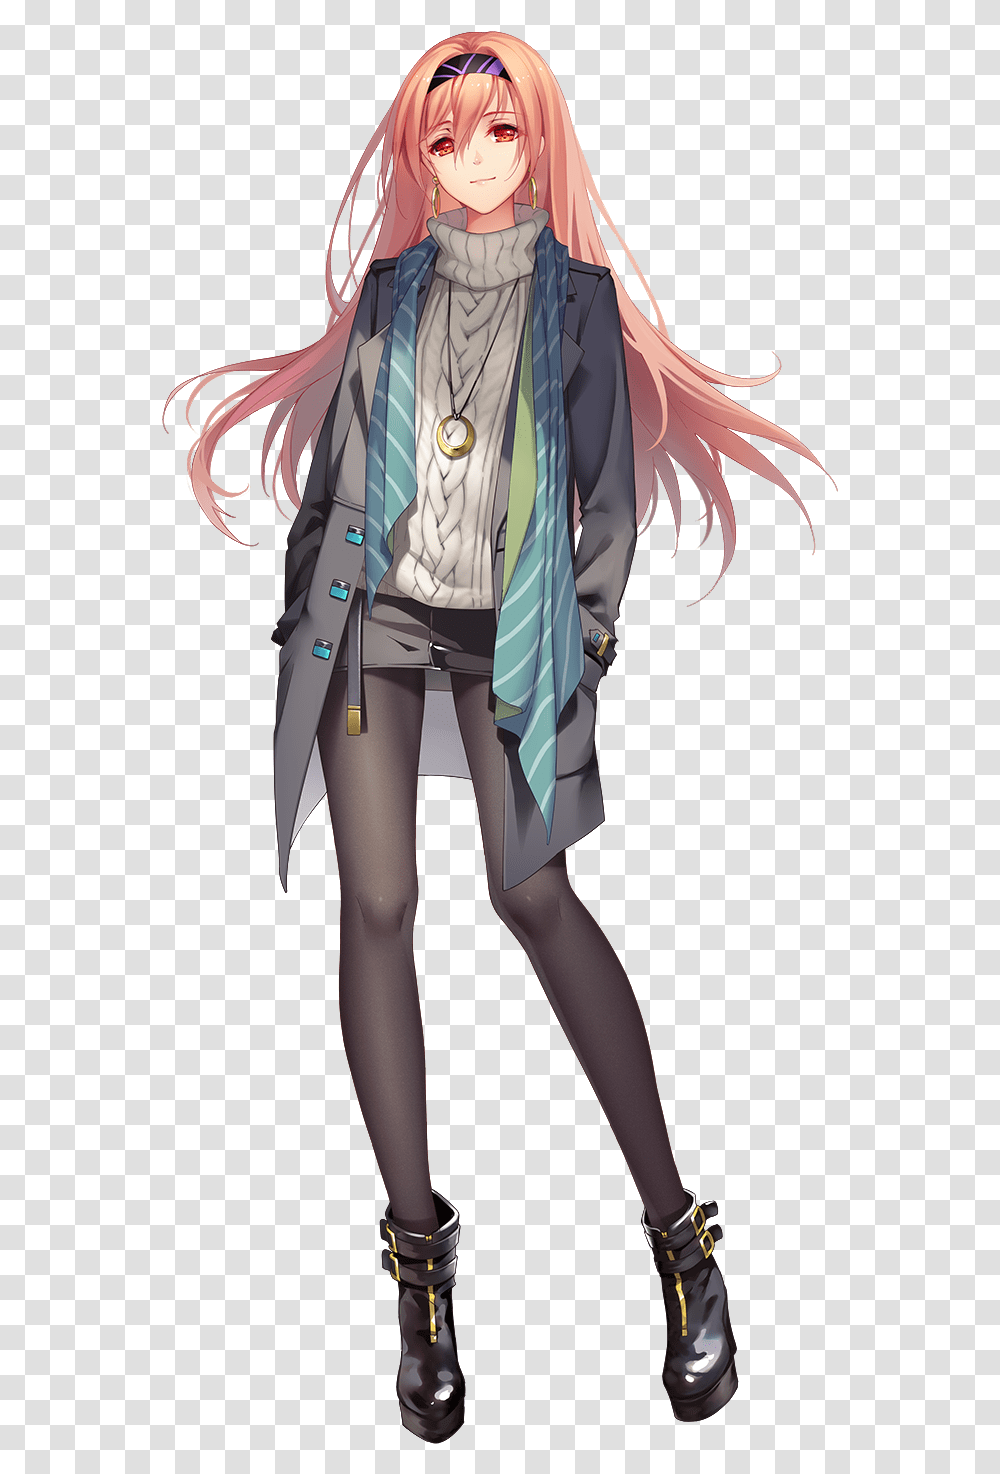 Background Free Images Full Body Anime Girl Drawing, Costume, Clothing, Person, Manga Transparent Png